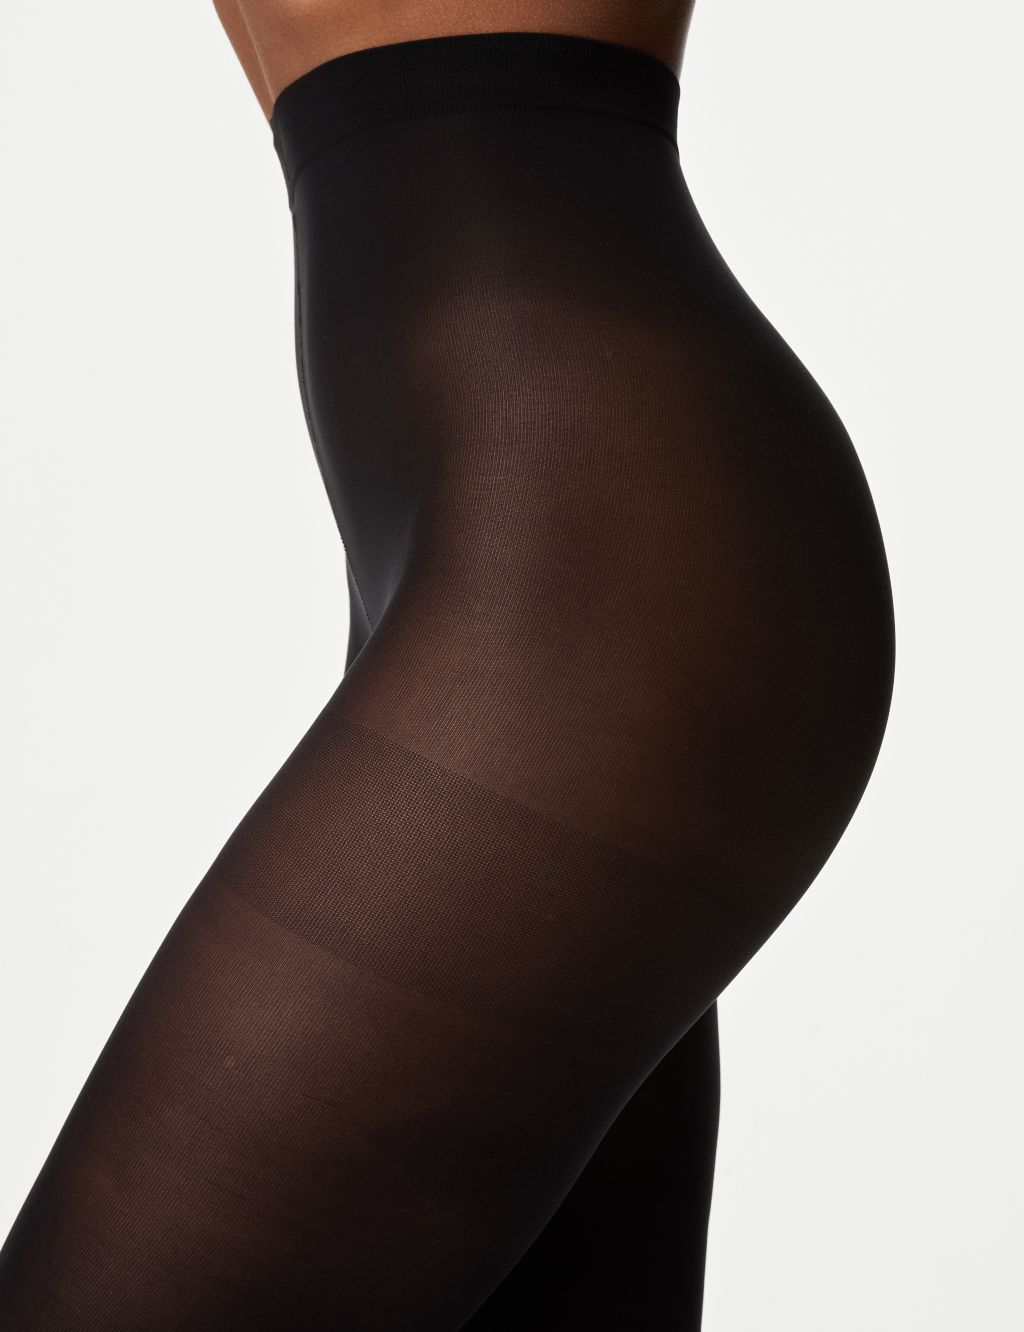 Tights Dept. - Cotton footless tights by Trasparenze